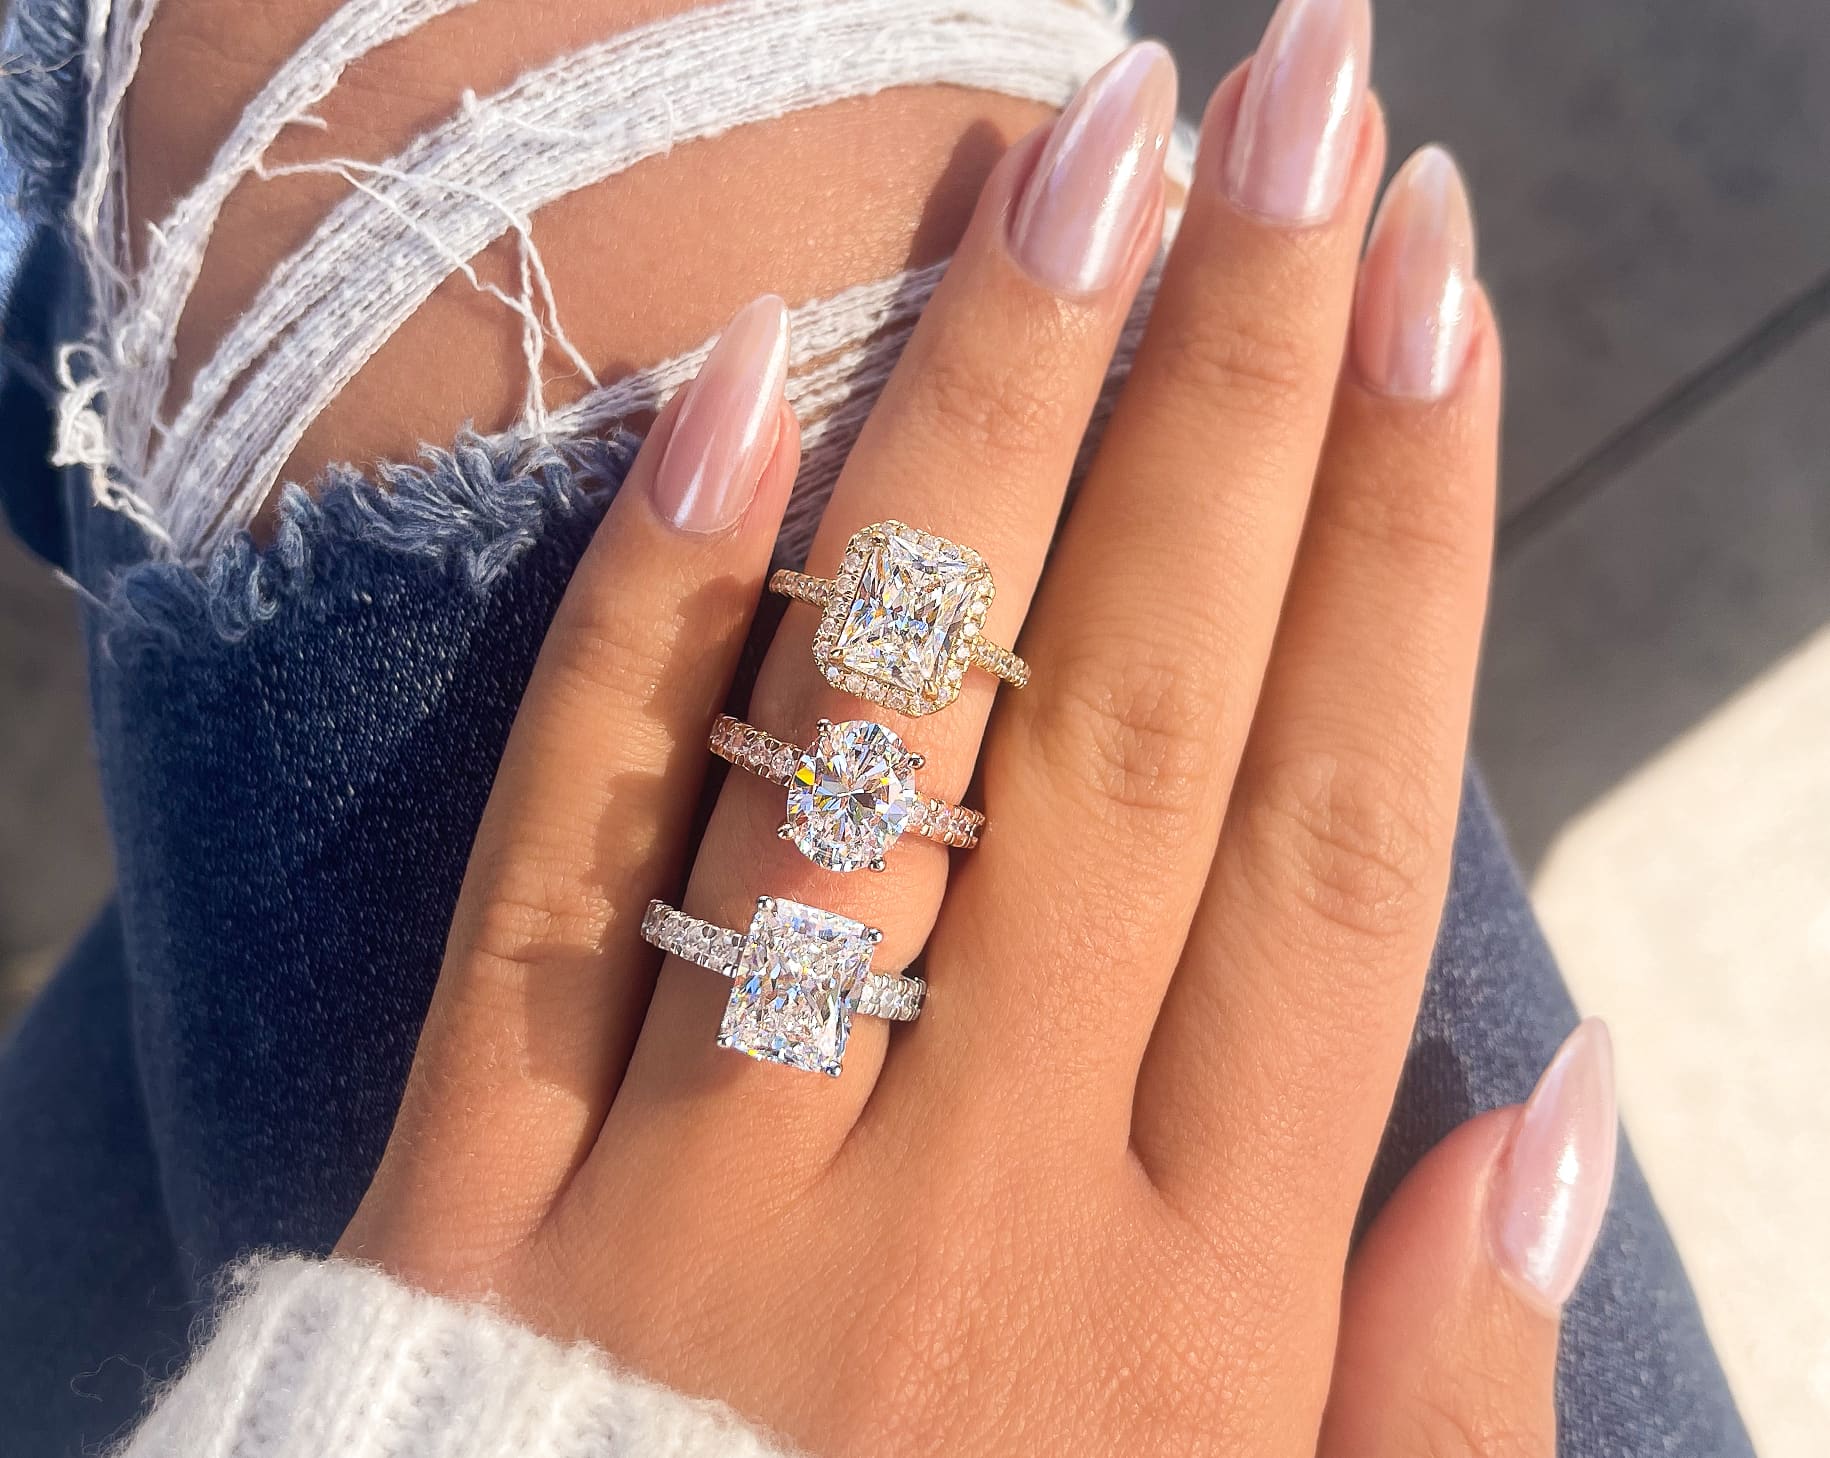 gorgeous 3 engagement rings shown on ladies hand in silver, rose gold, and gold